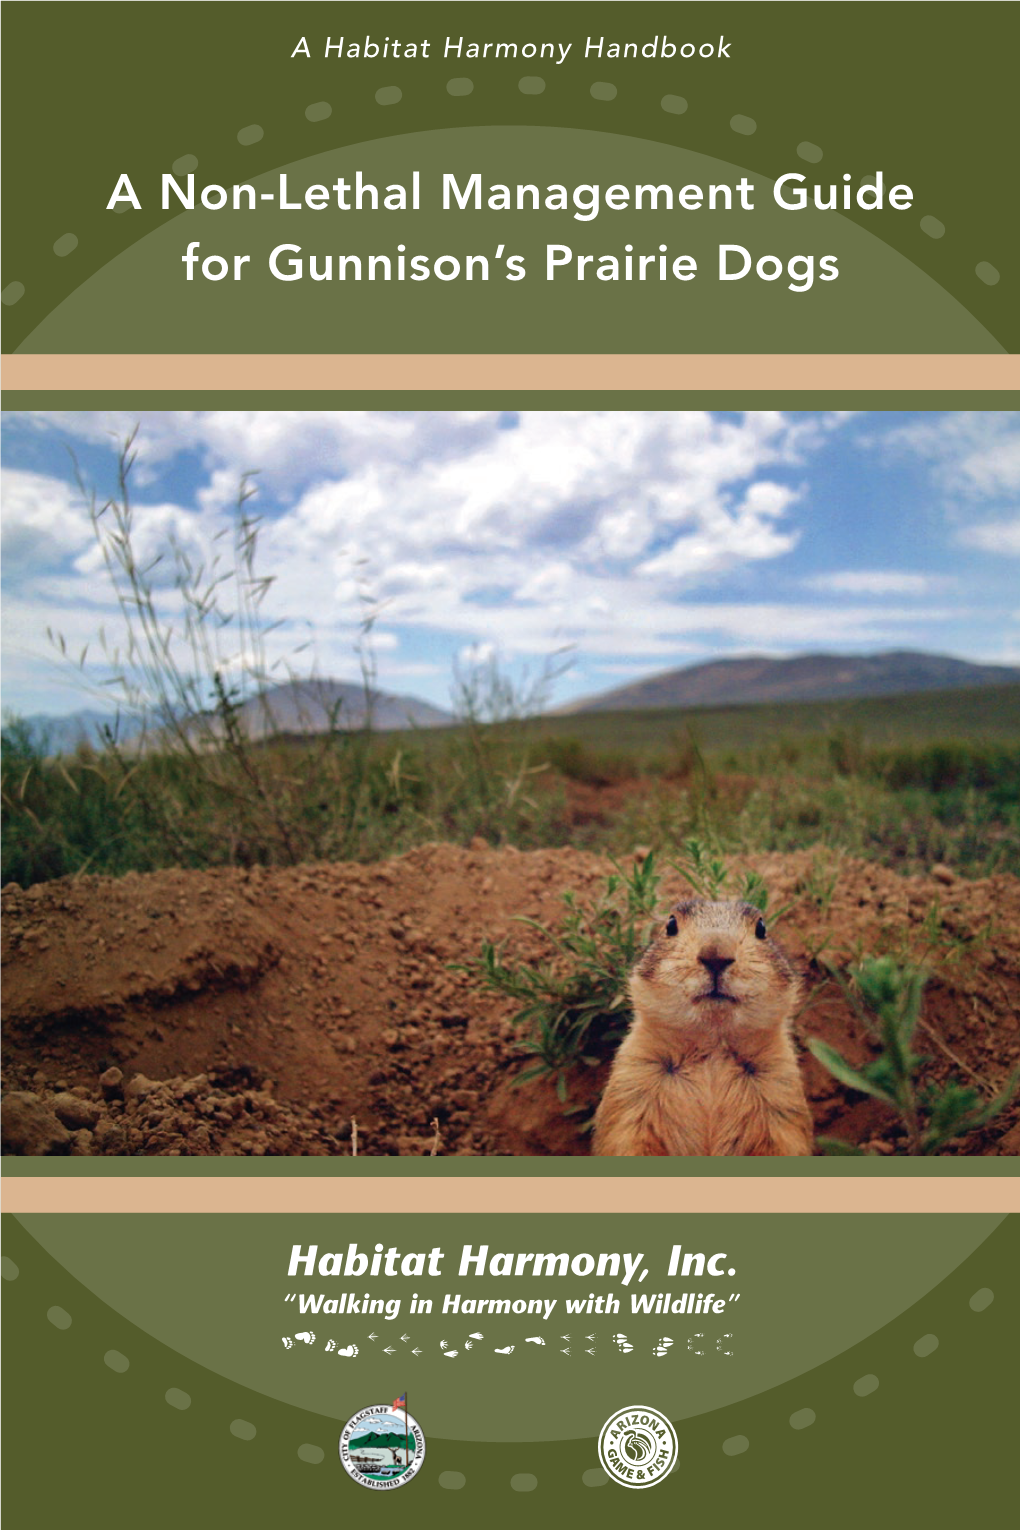 A Non-Lethal Management Guide for Gunnison's Prairie Dogs